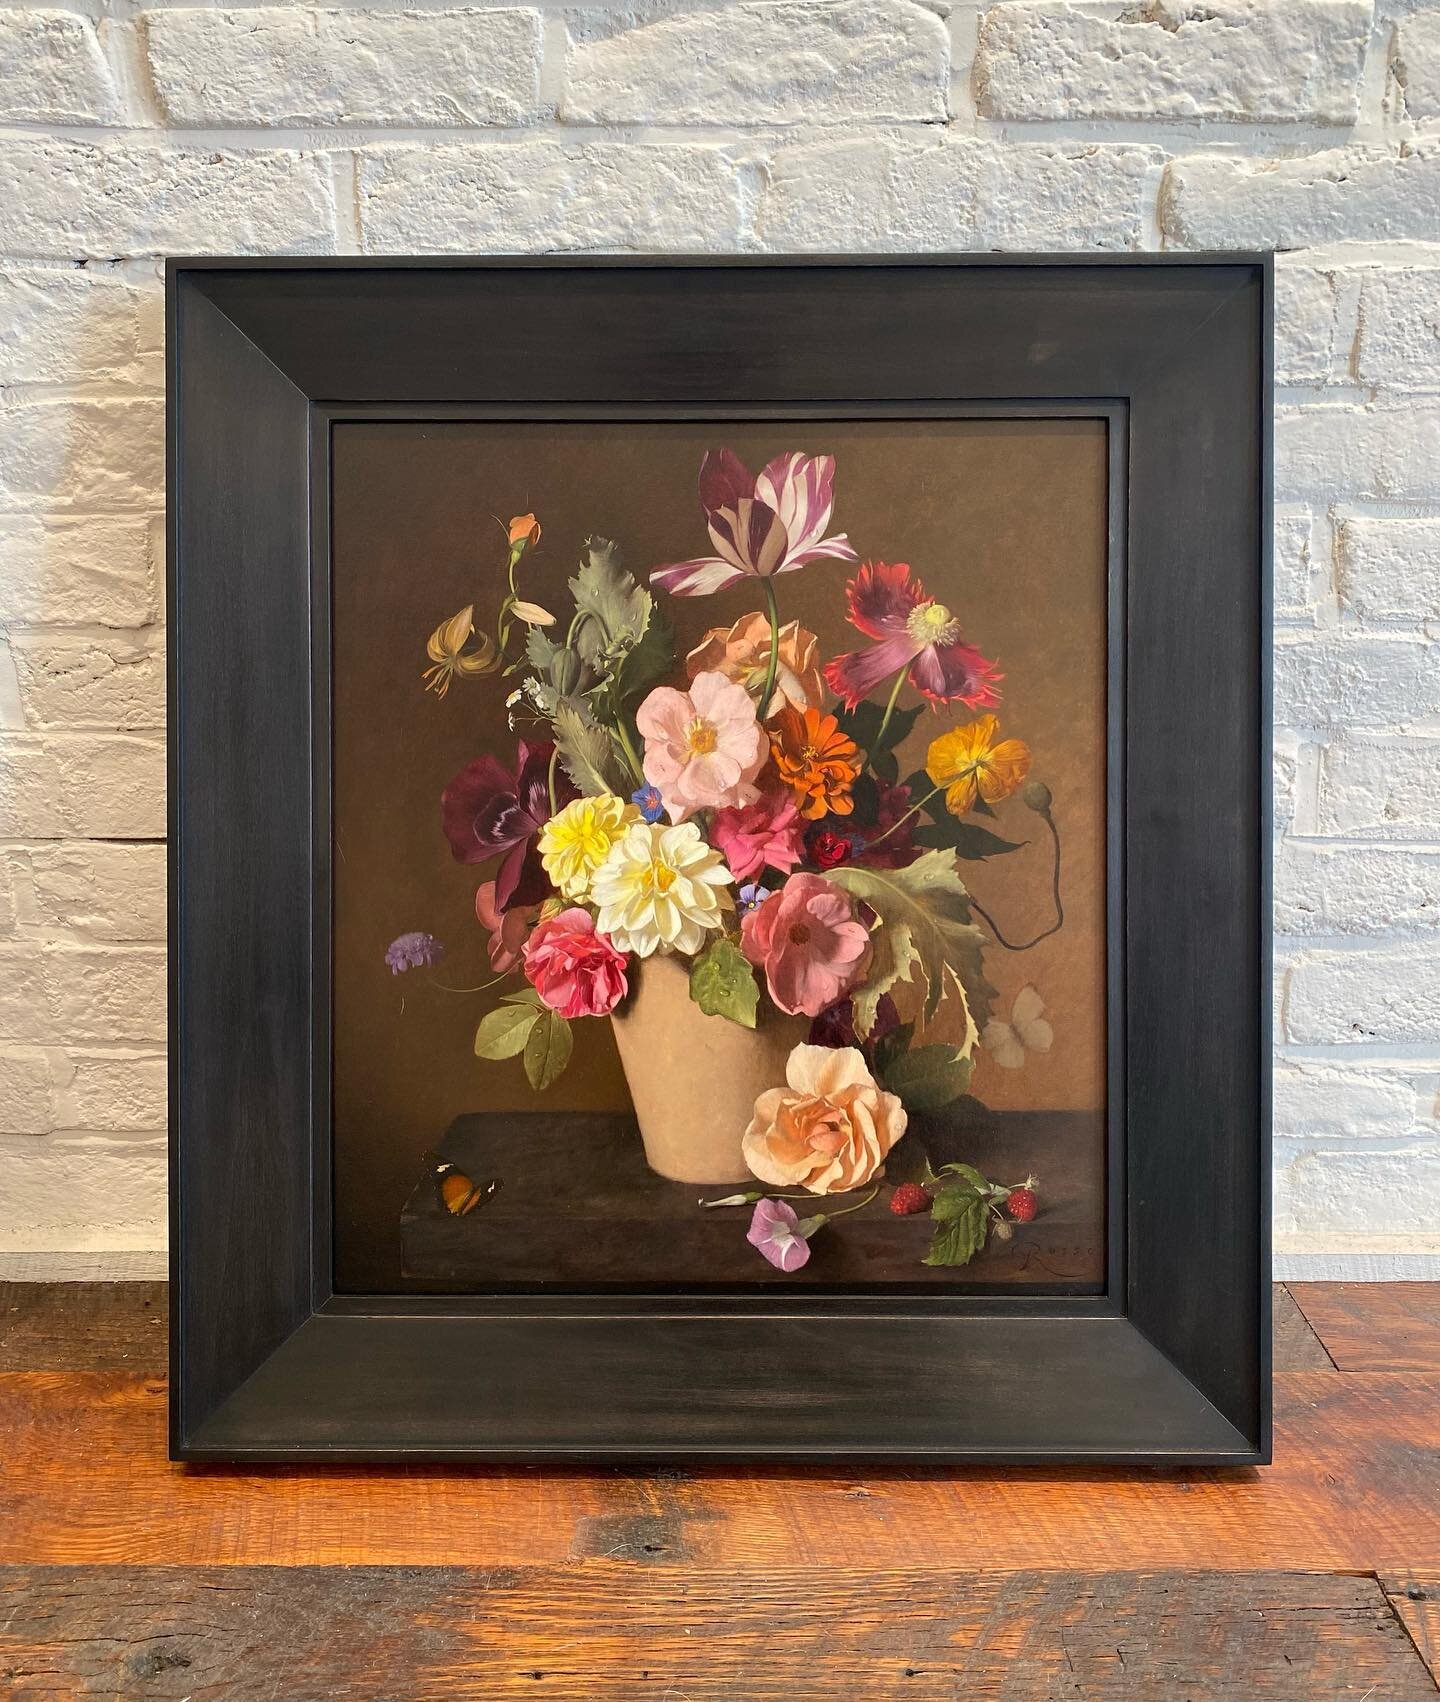 Exquisite &lsquo;Spring Flowers&rsquo; by Carlo Russo. #painting #stilllife #flowers #carlorusso